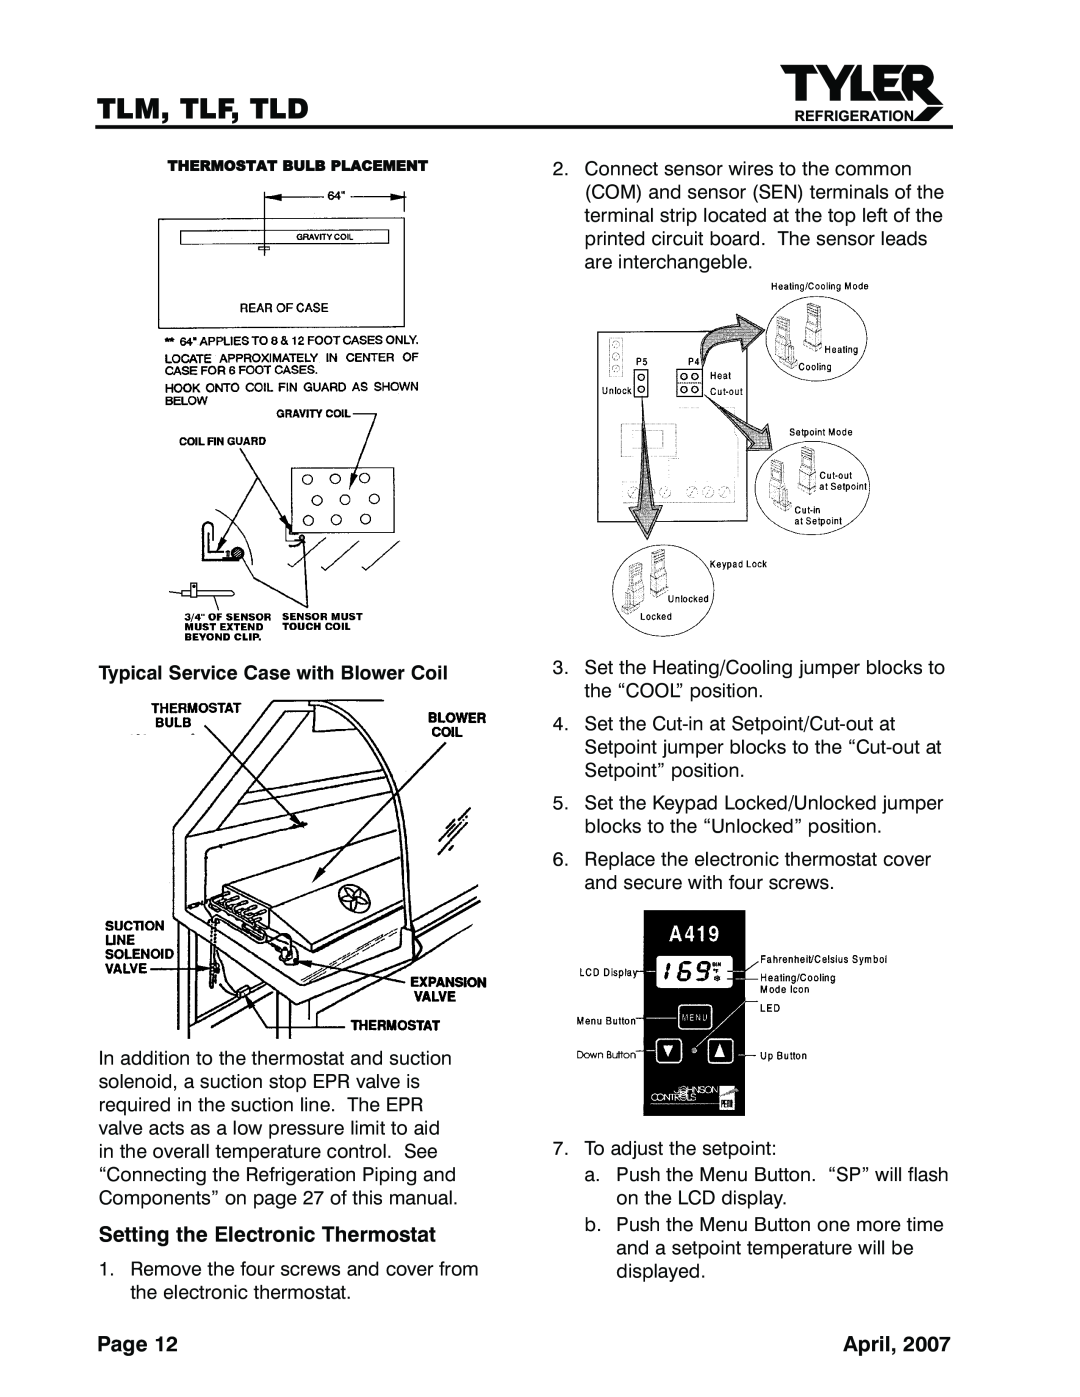 Tyler Refrigeration TLF, TLD, TLM service manual Tlm, Tlf, Tld, Setting the Electronic Thermostat, Page, April 